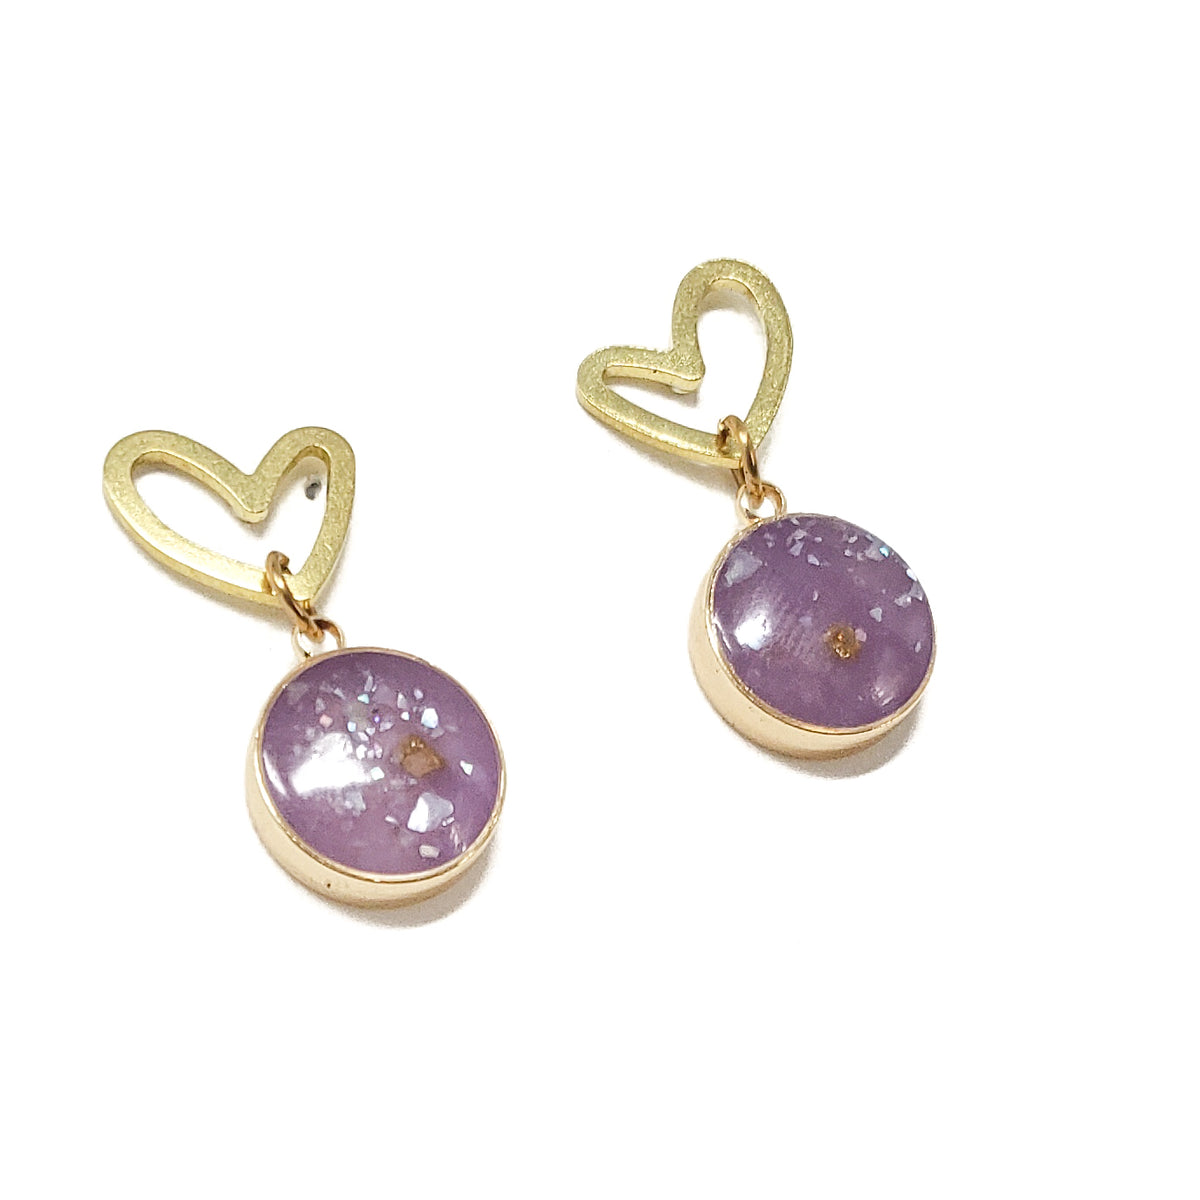 Elissia Brass and Resin Earrings - Lavender